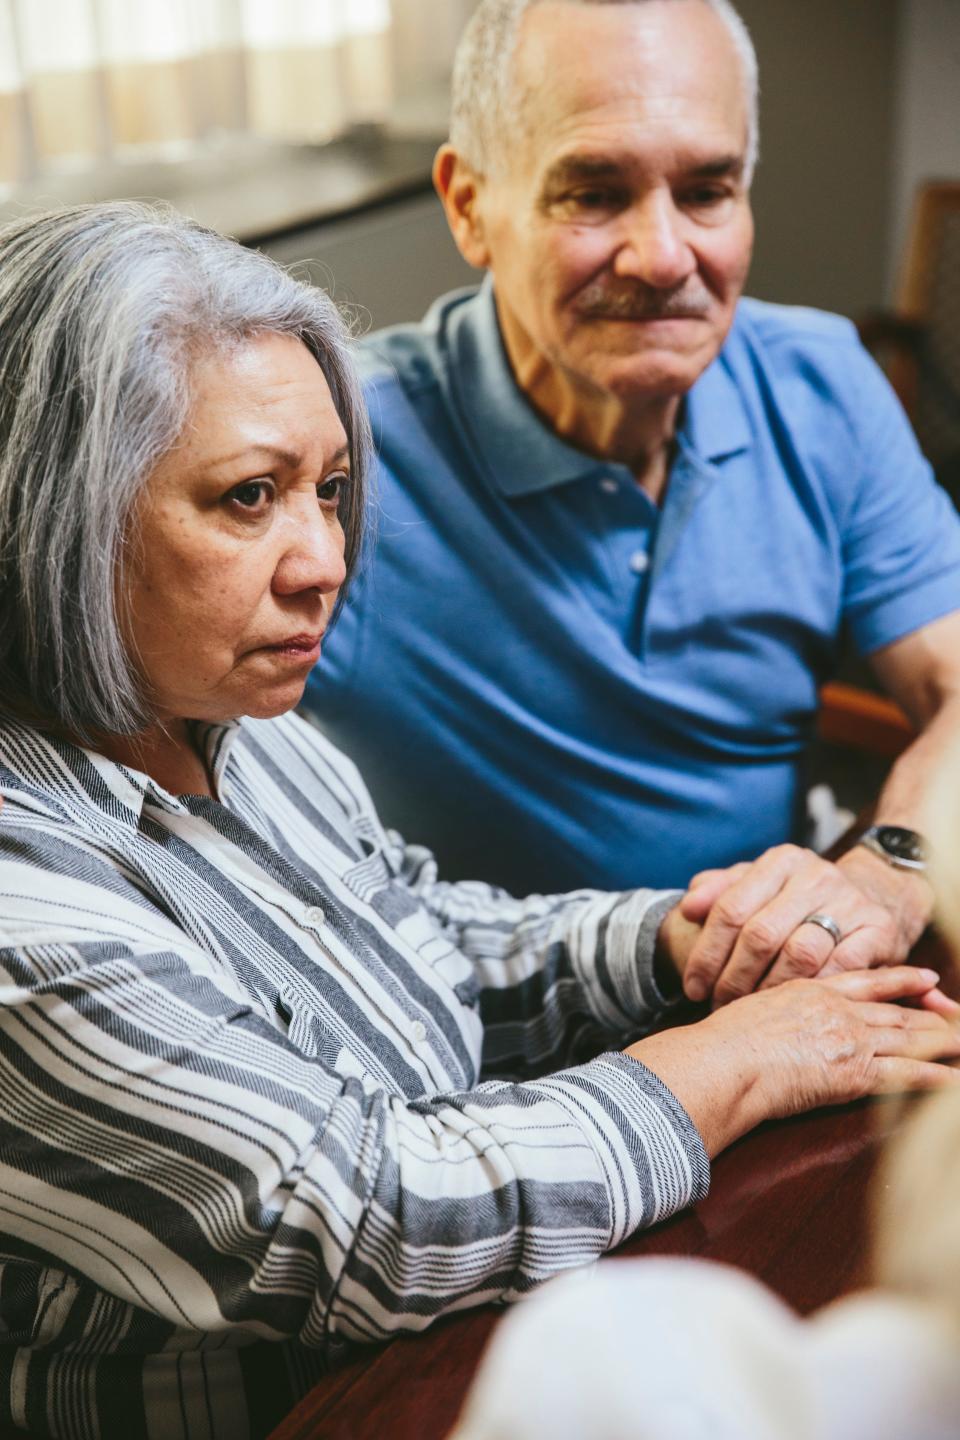 The Alzheimer's Association is hosting several in-person programs in March, including "Living with Alzheimer's for Caregivers – Middle Stage" at Kingston of Marion on March 26.